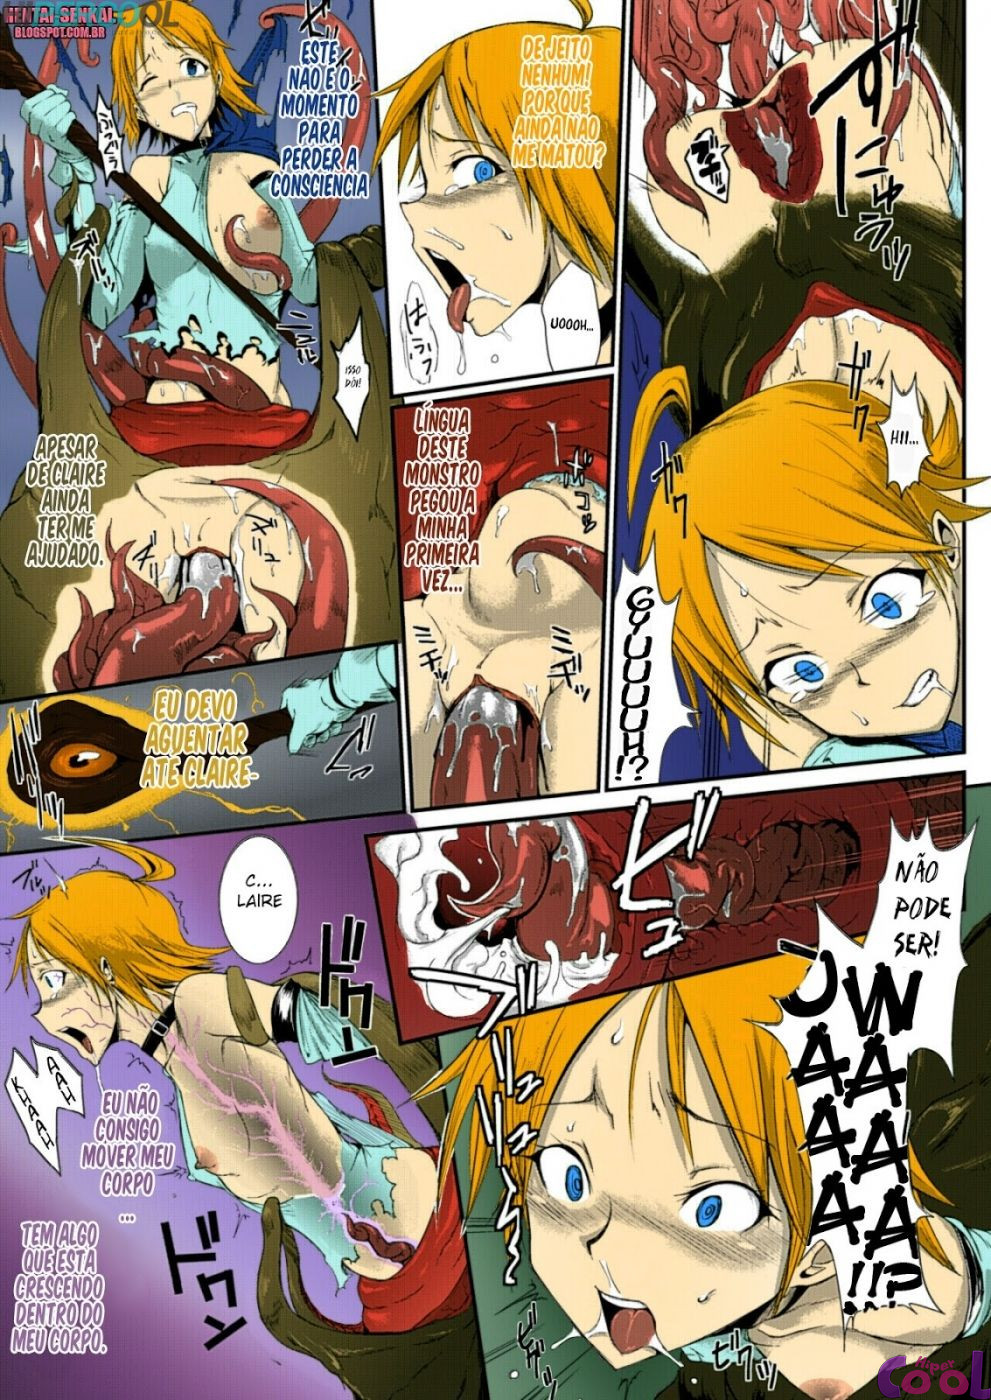 man-eater-colorido-chapter-01-page-05.jpg